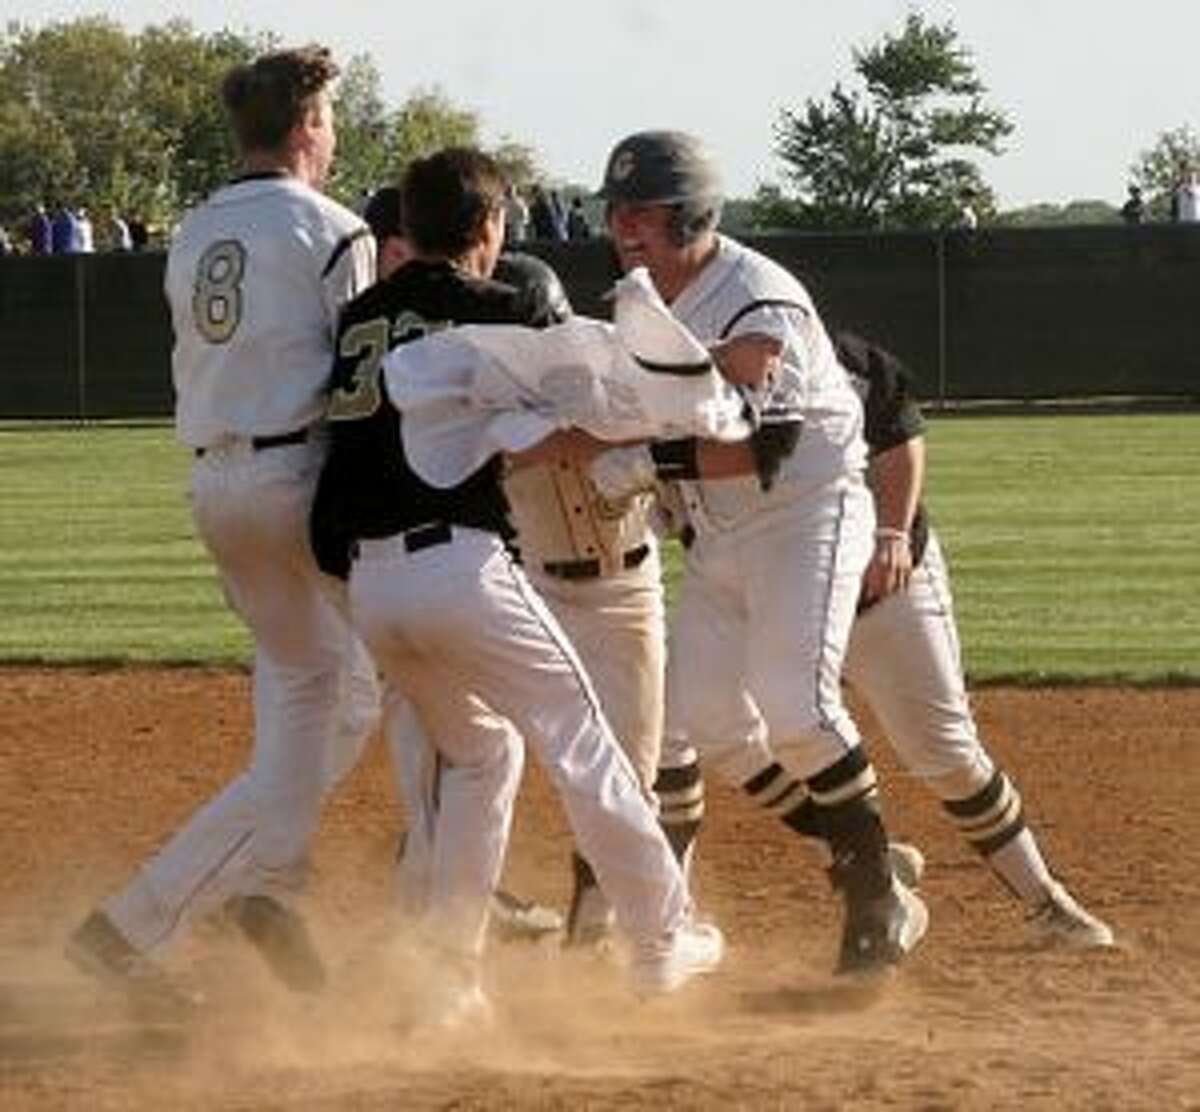 Trumbull High's Kris DiCocco draws a crowd after his RBI single plated the winning run. — Bill Bloxsom photos